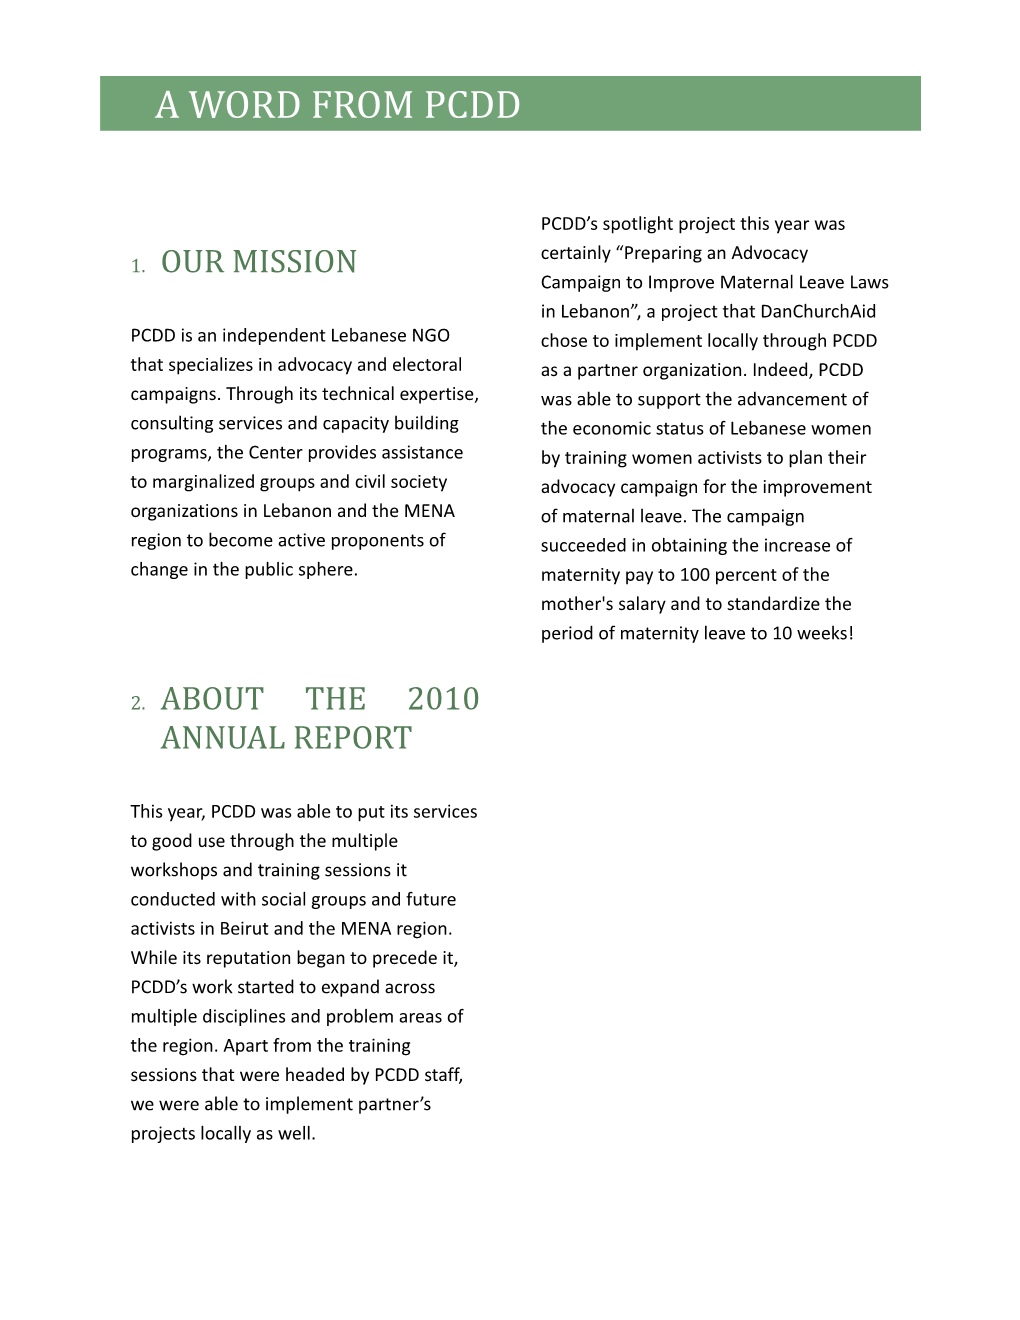 About the 2010 Annual Report